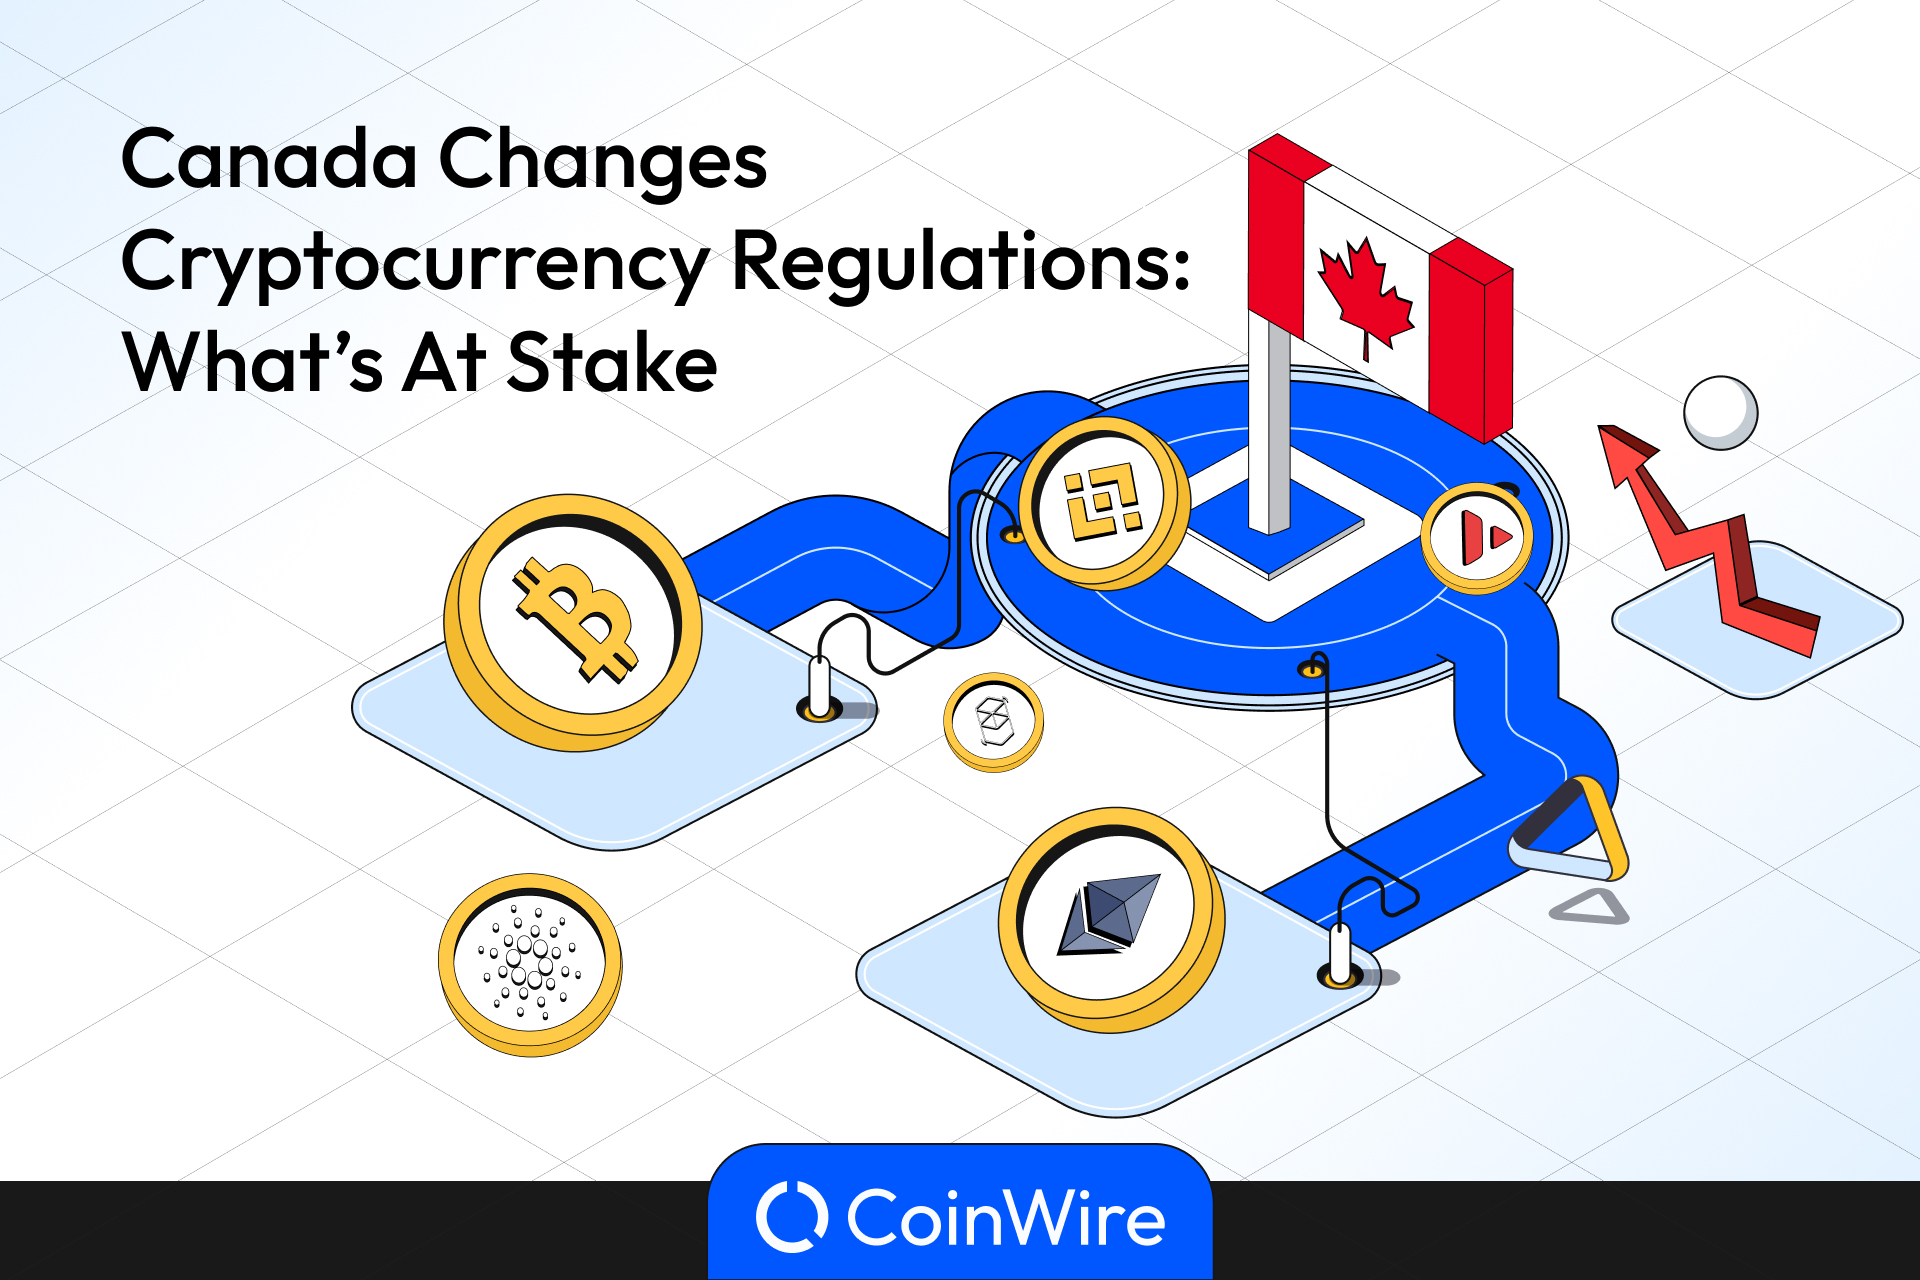 Canada Changes Cryptocurrency Regulations_ What’s At Stake